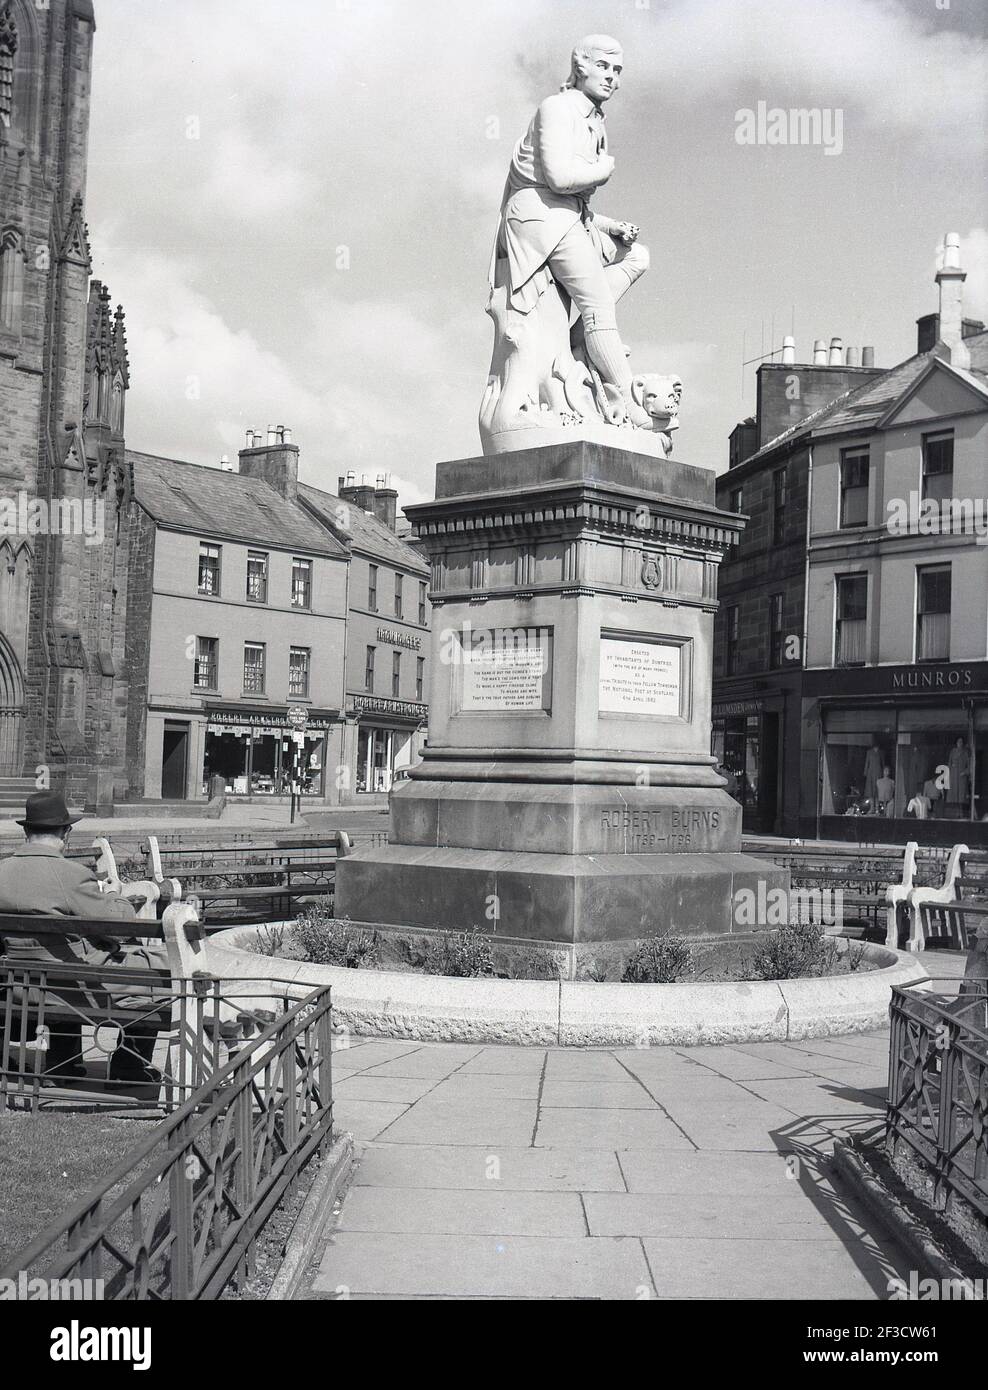 1961, historical, a statue honouring Scottish writer and National Poet, Robert Burns, in the square of the market town of Dumries, Scotland, where he lived from 1791 to 1796. Designed by Amelia Robertson Hill, the statue was sculpted in Carrara, Italy in 1882 and its location in Dumfies means it is overlooked by the Greyfairs church. Stock Photo